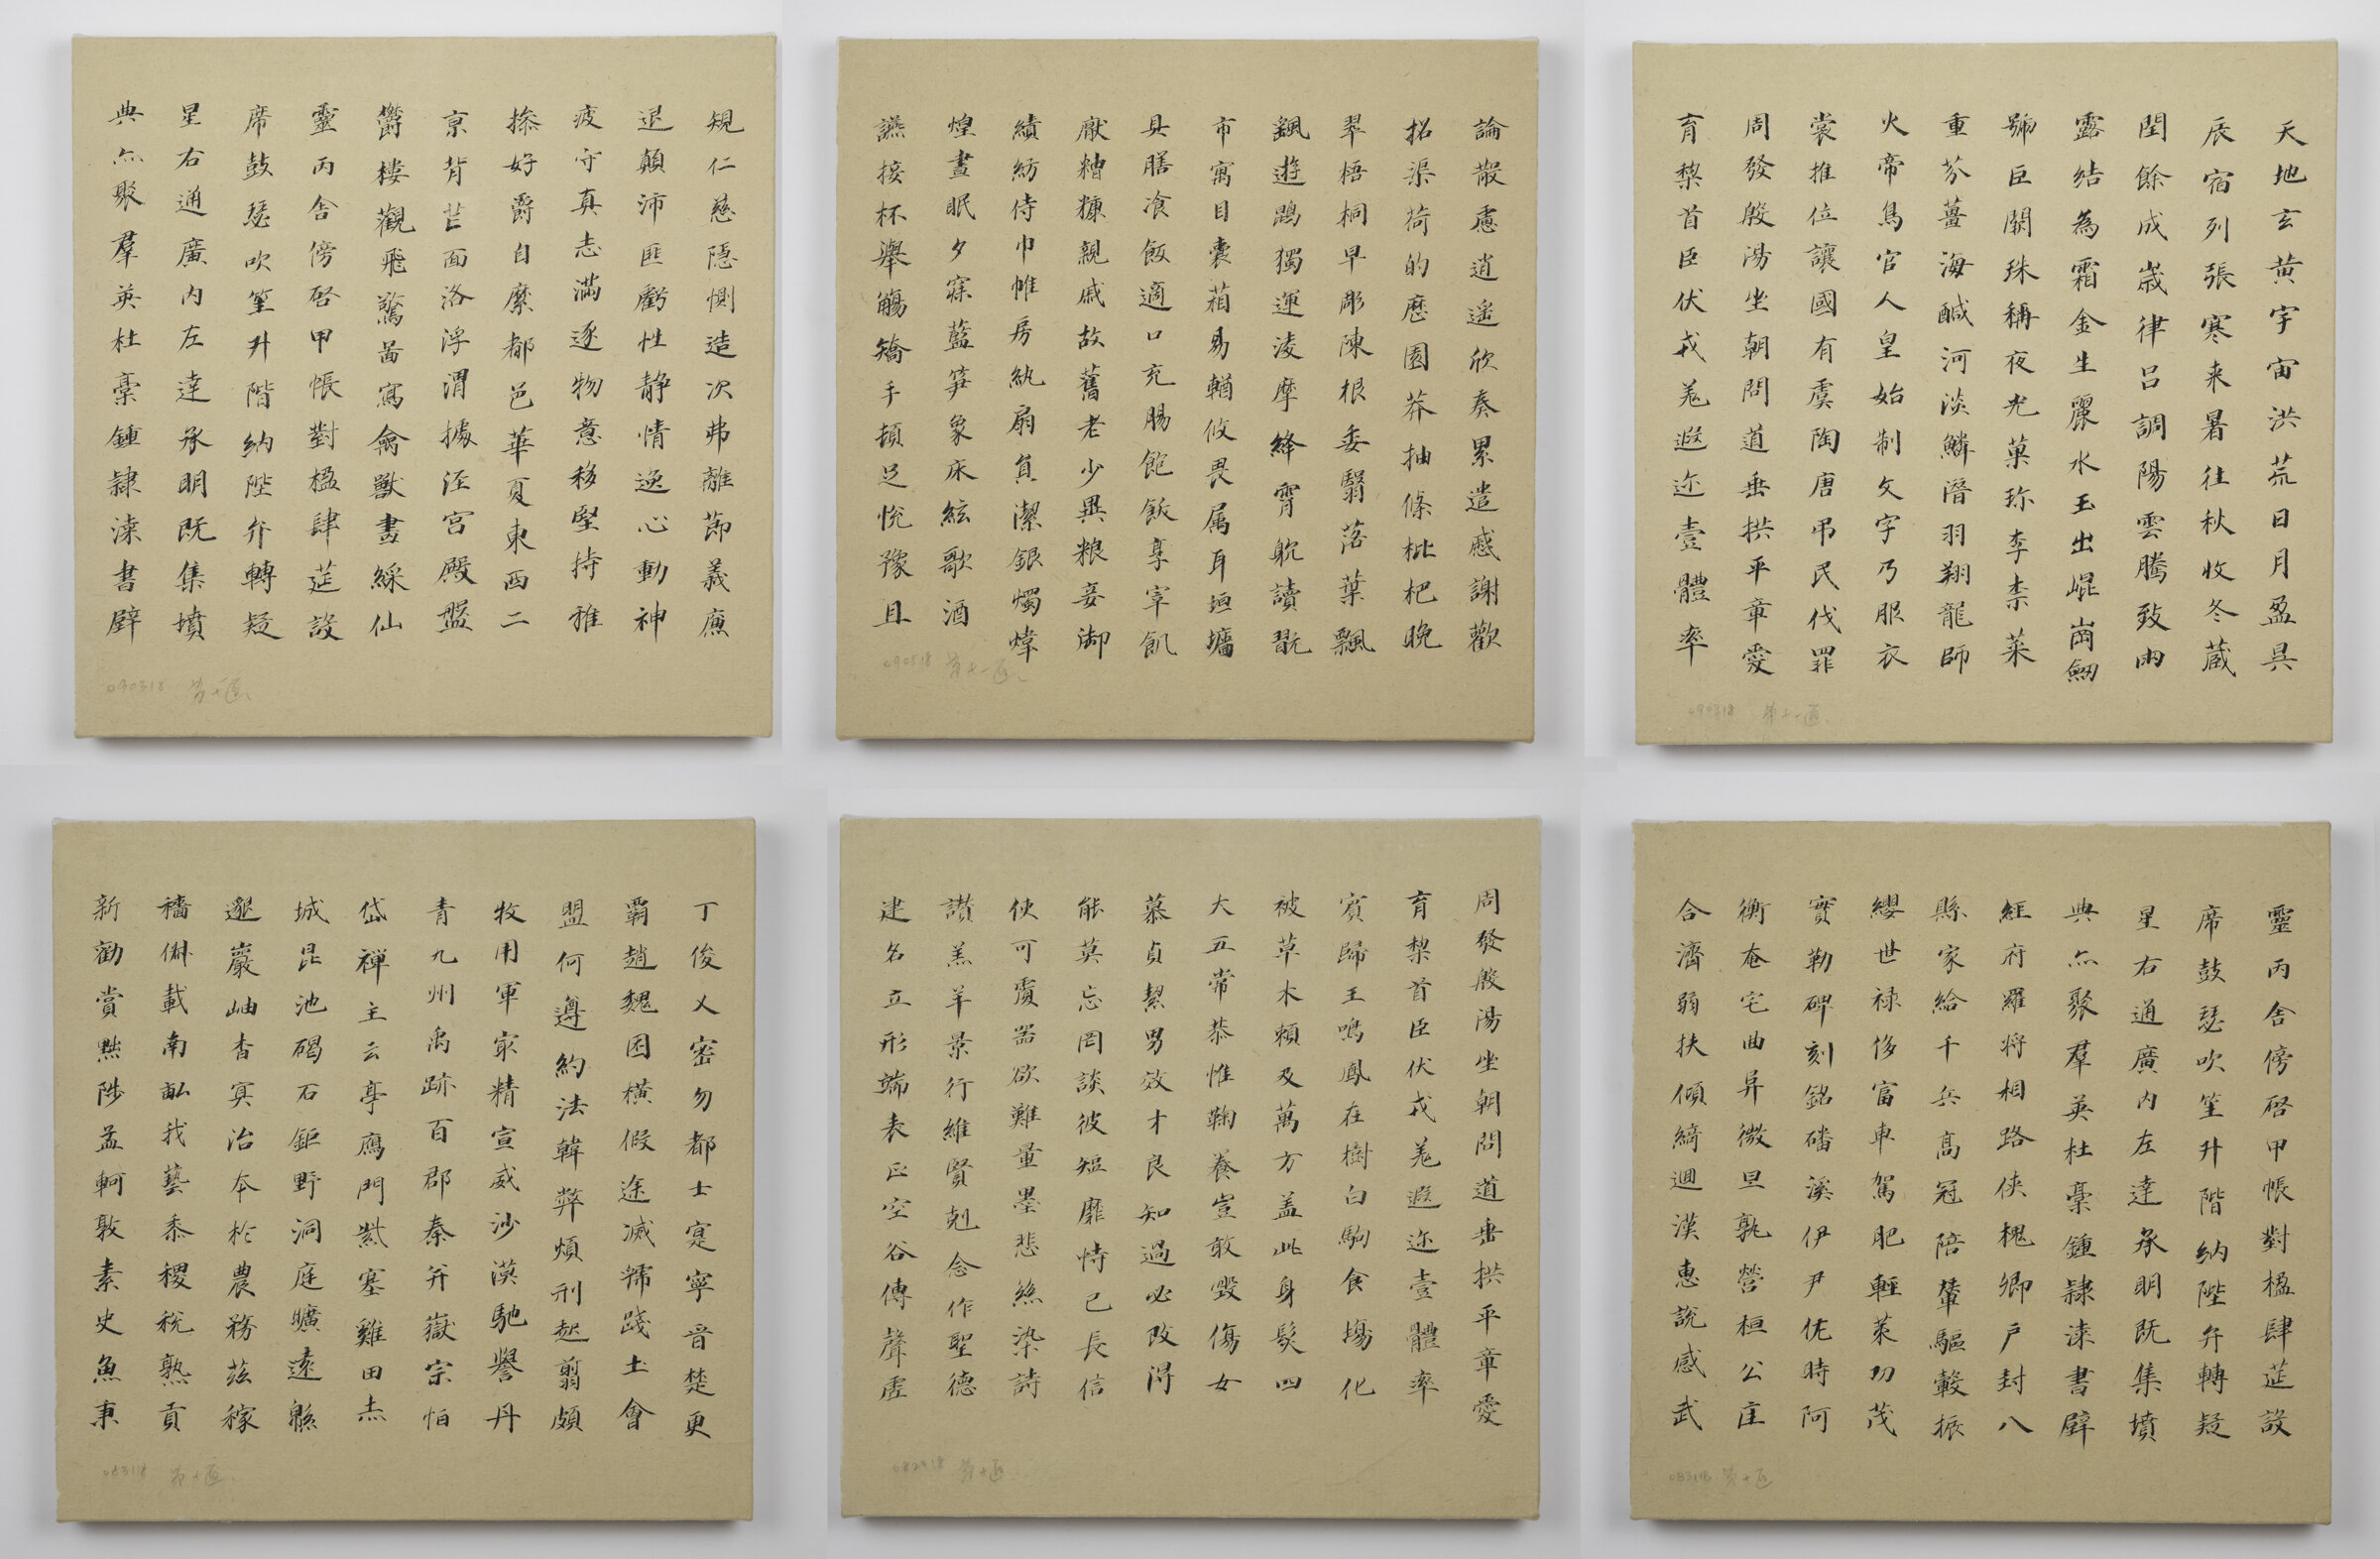  Wei Jia,  No. 18222 , 2018. Ink on paper mounted on canvas backed with wood board, 6 works, each 16 x 16 inches ©Wei Jia, courtesy Fou Gallery   